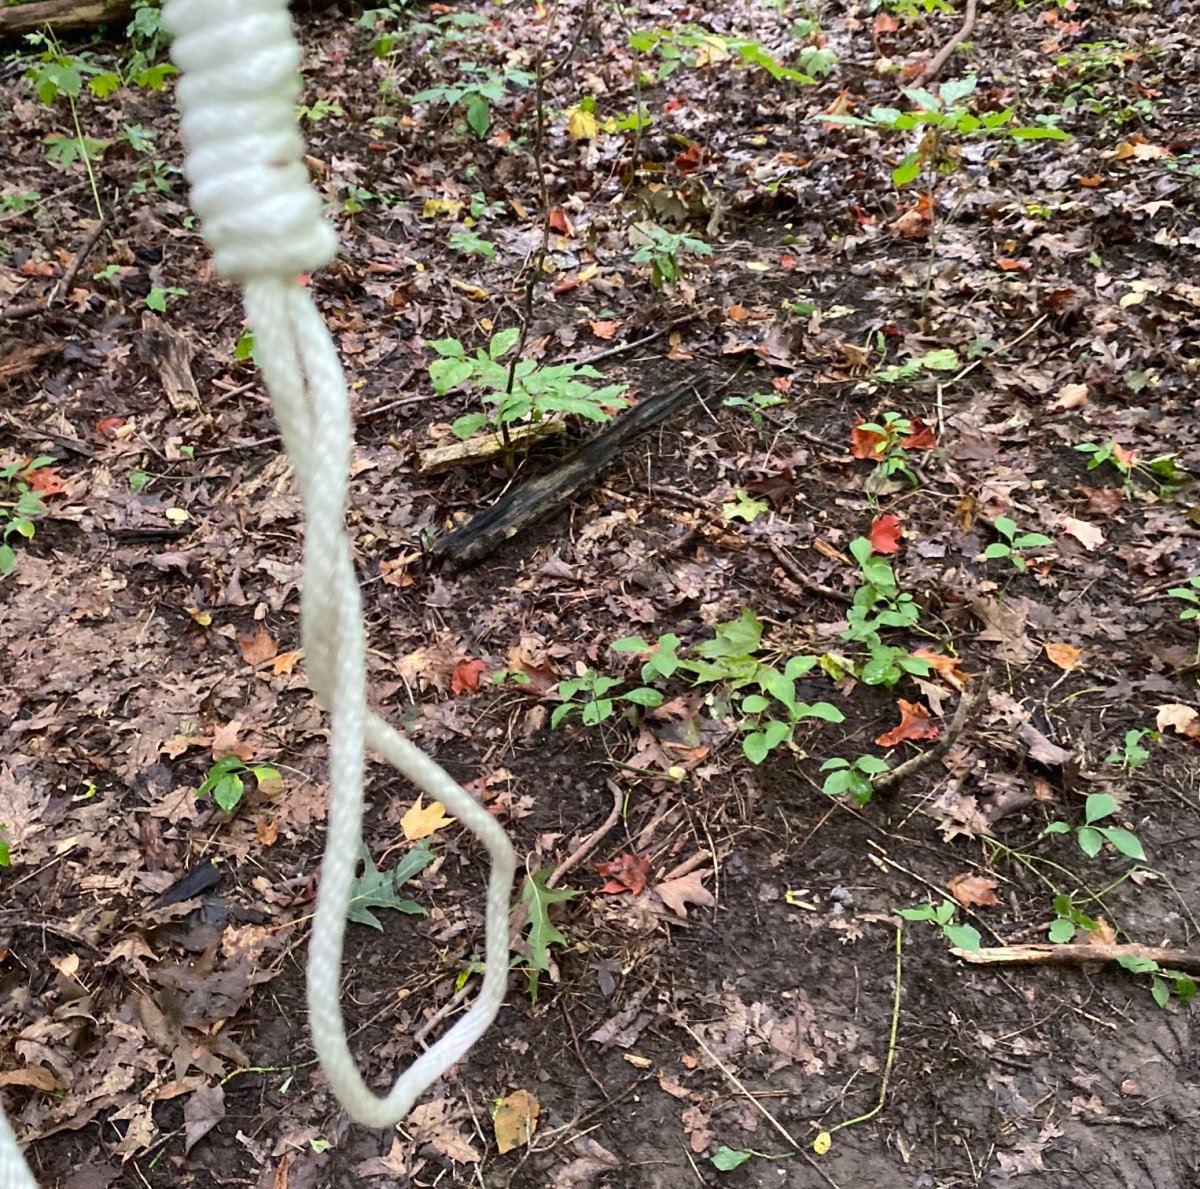 A noose was found in Warbler Woods in London, Ont., on Sept. 7, 2020.